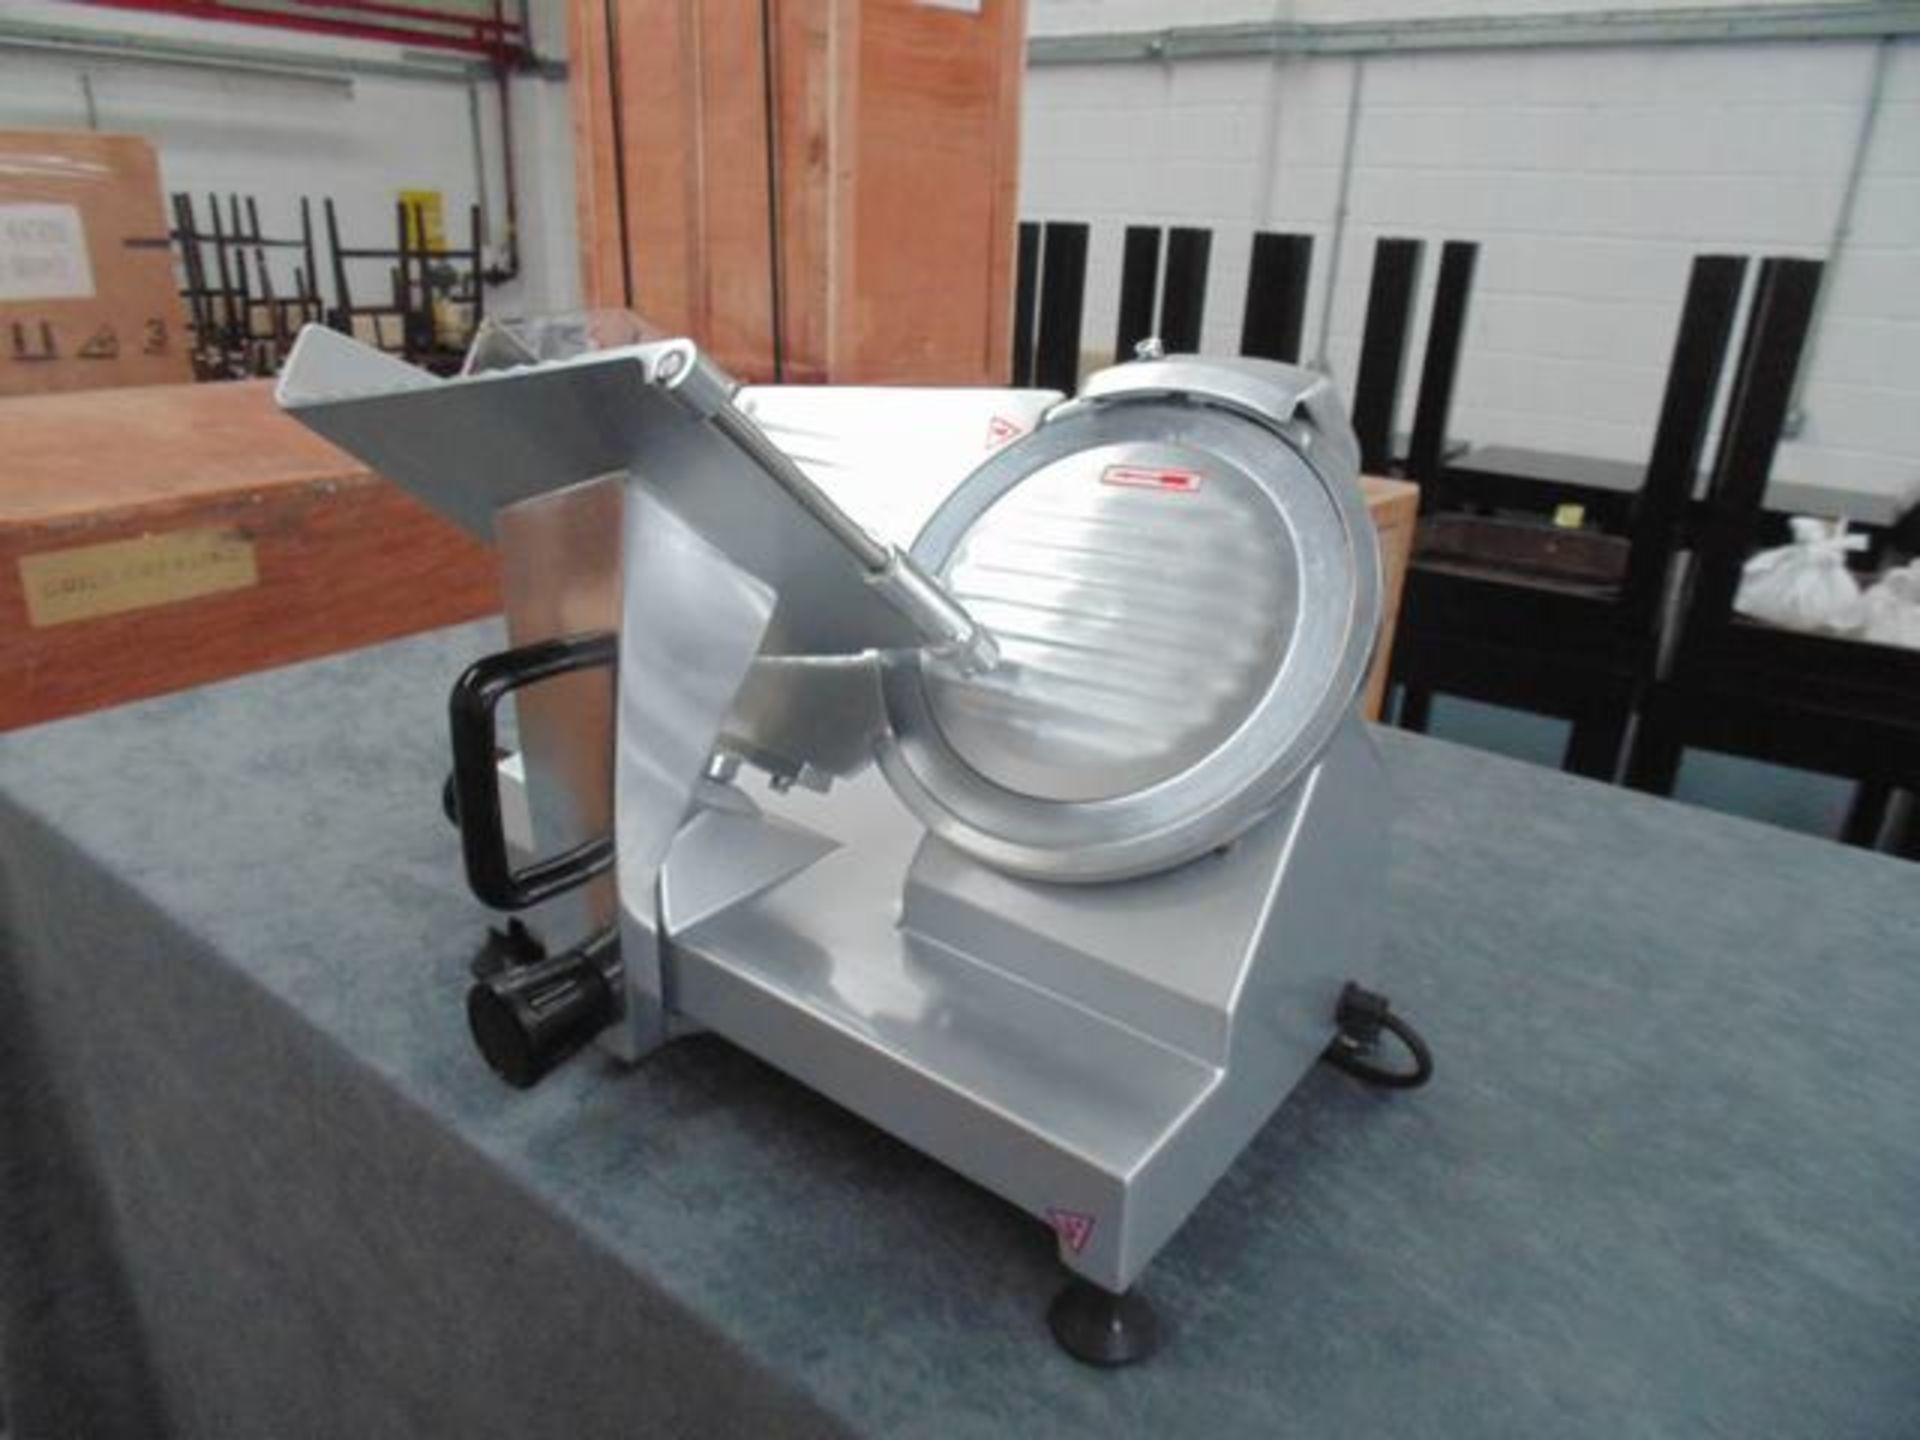 Commercial gravity fed slicer high carbon steel blade is hard chromed, with a hollow ground taper